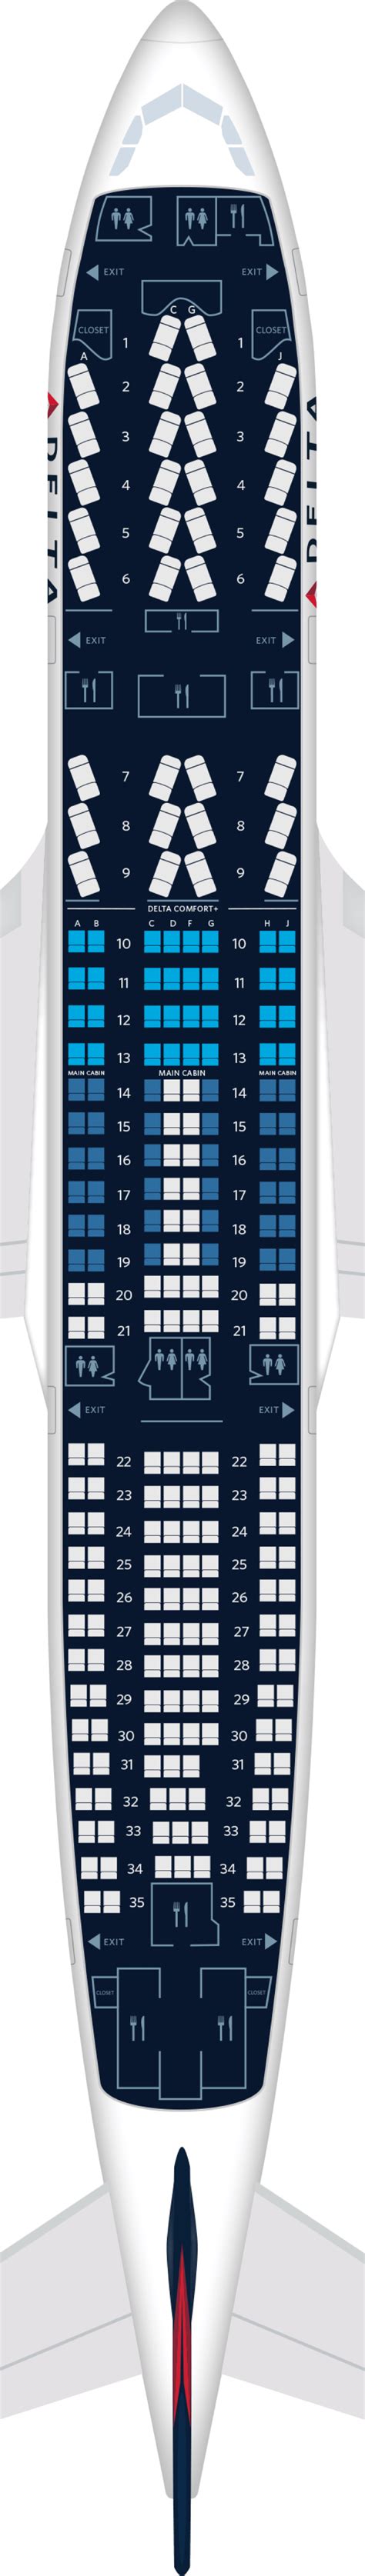 Airbus A Delta Seating Chart My Xxx Hot Girl